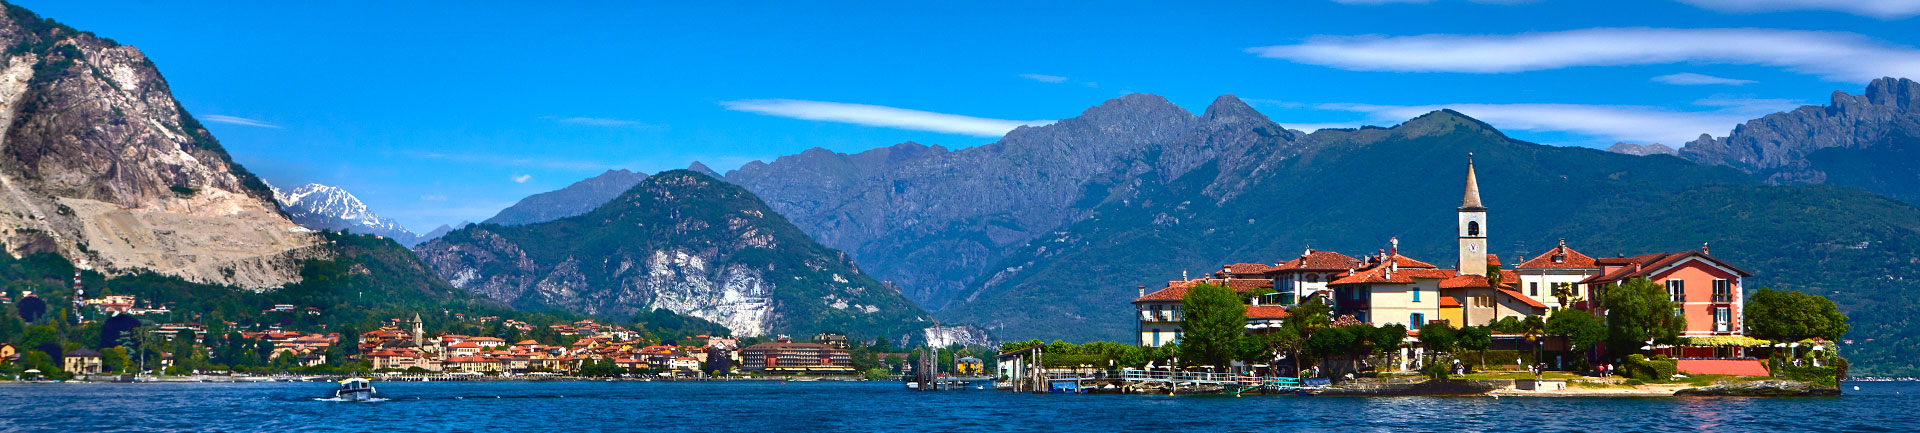 Stresa. The pearl of lake Maggiore amongst spectacular islands